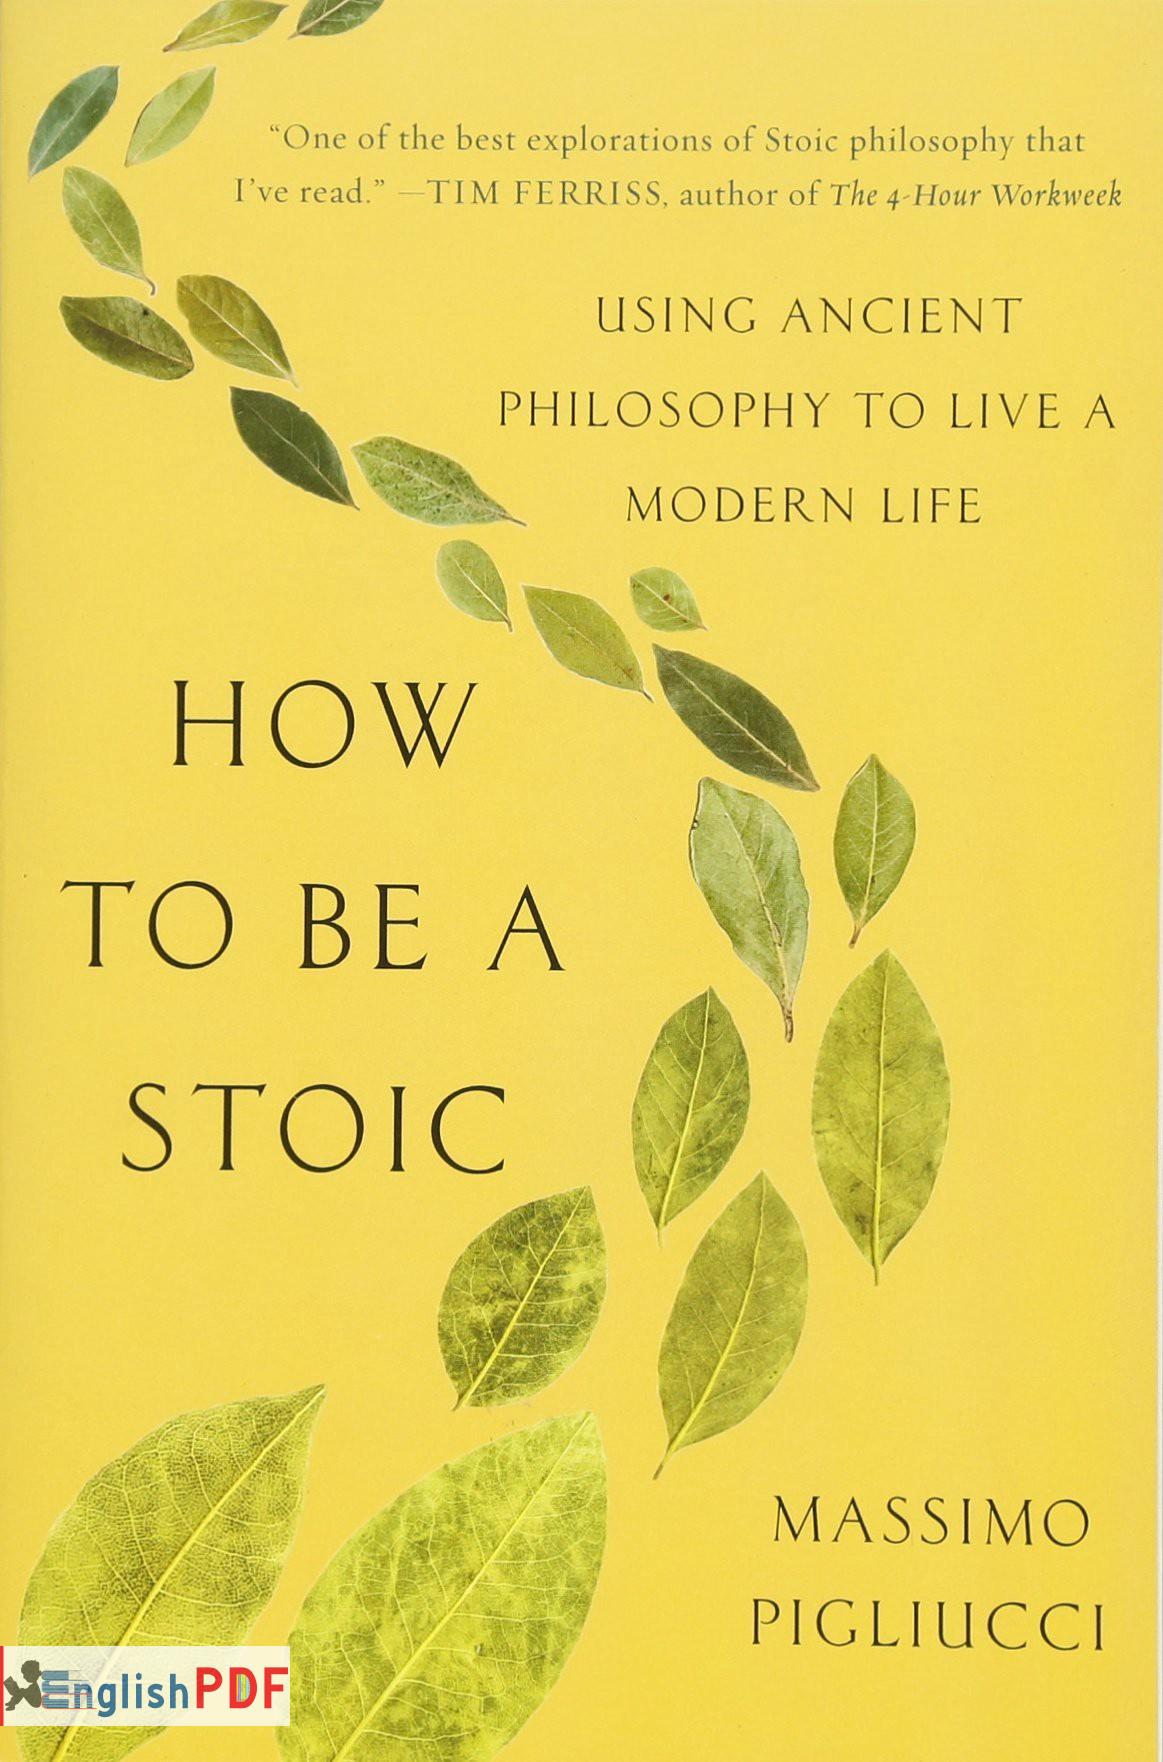 How To Be A Stoic PDF Download